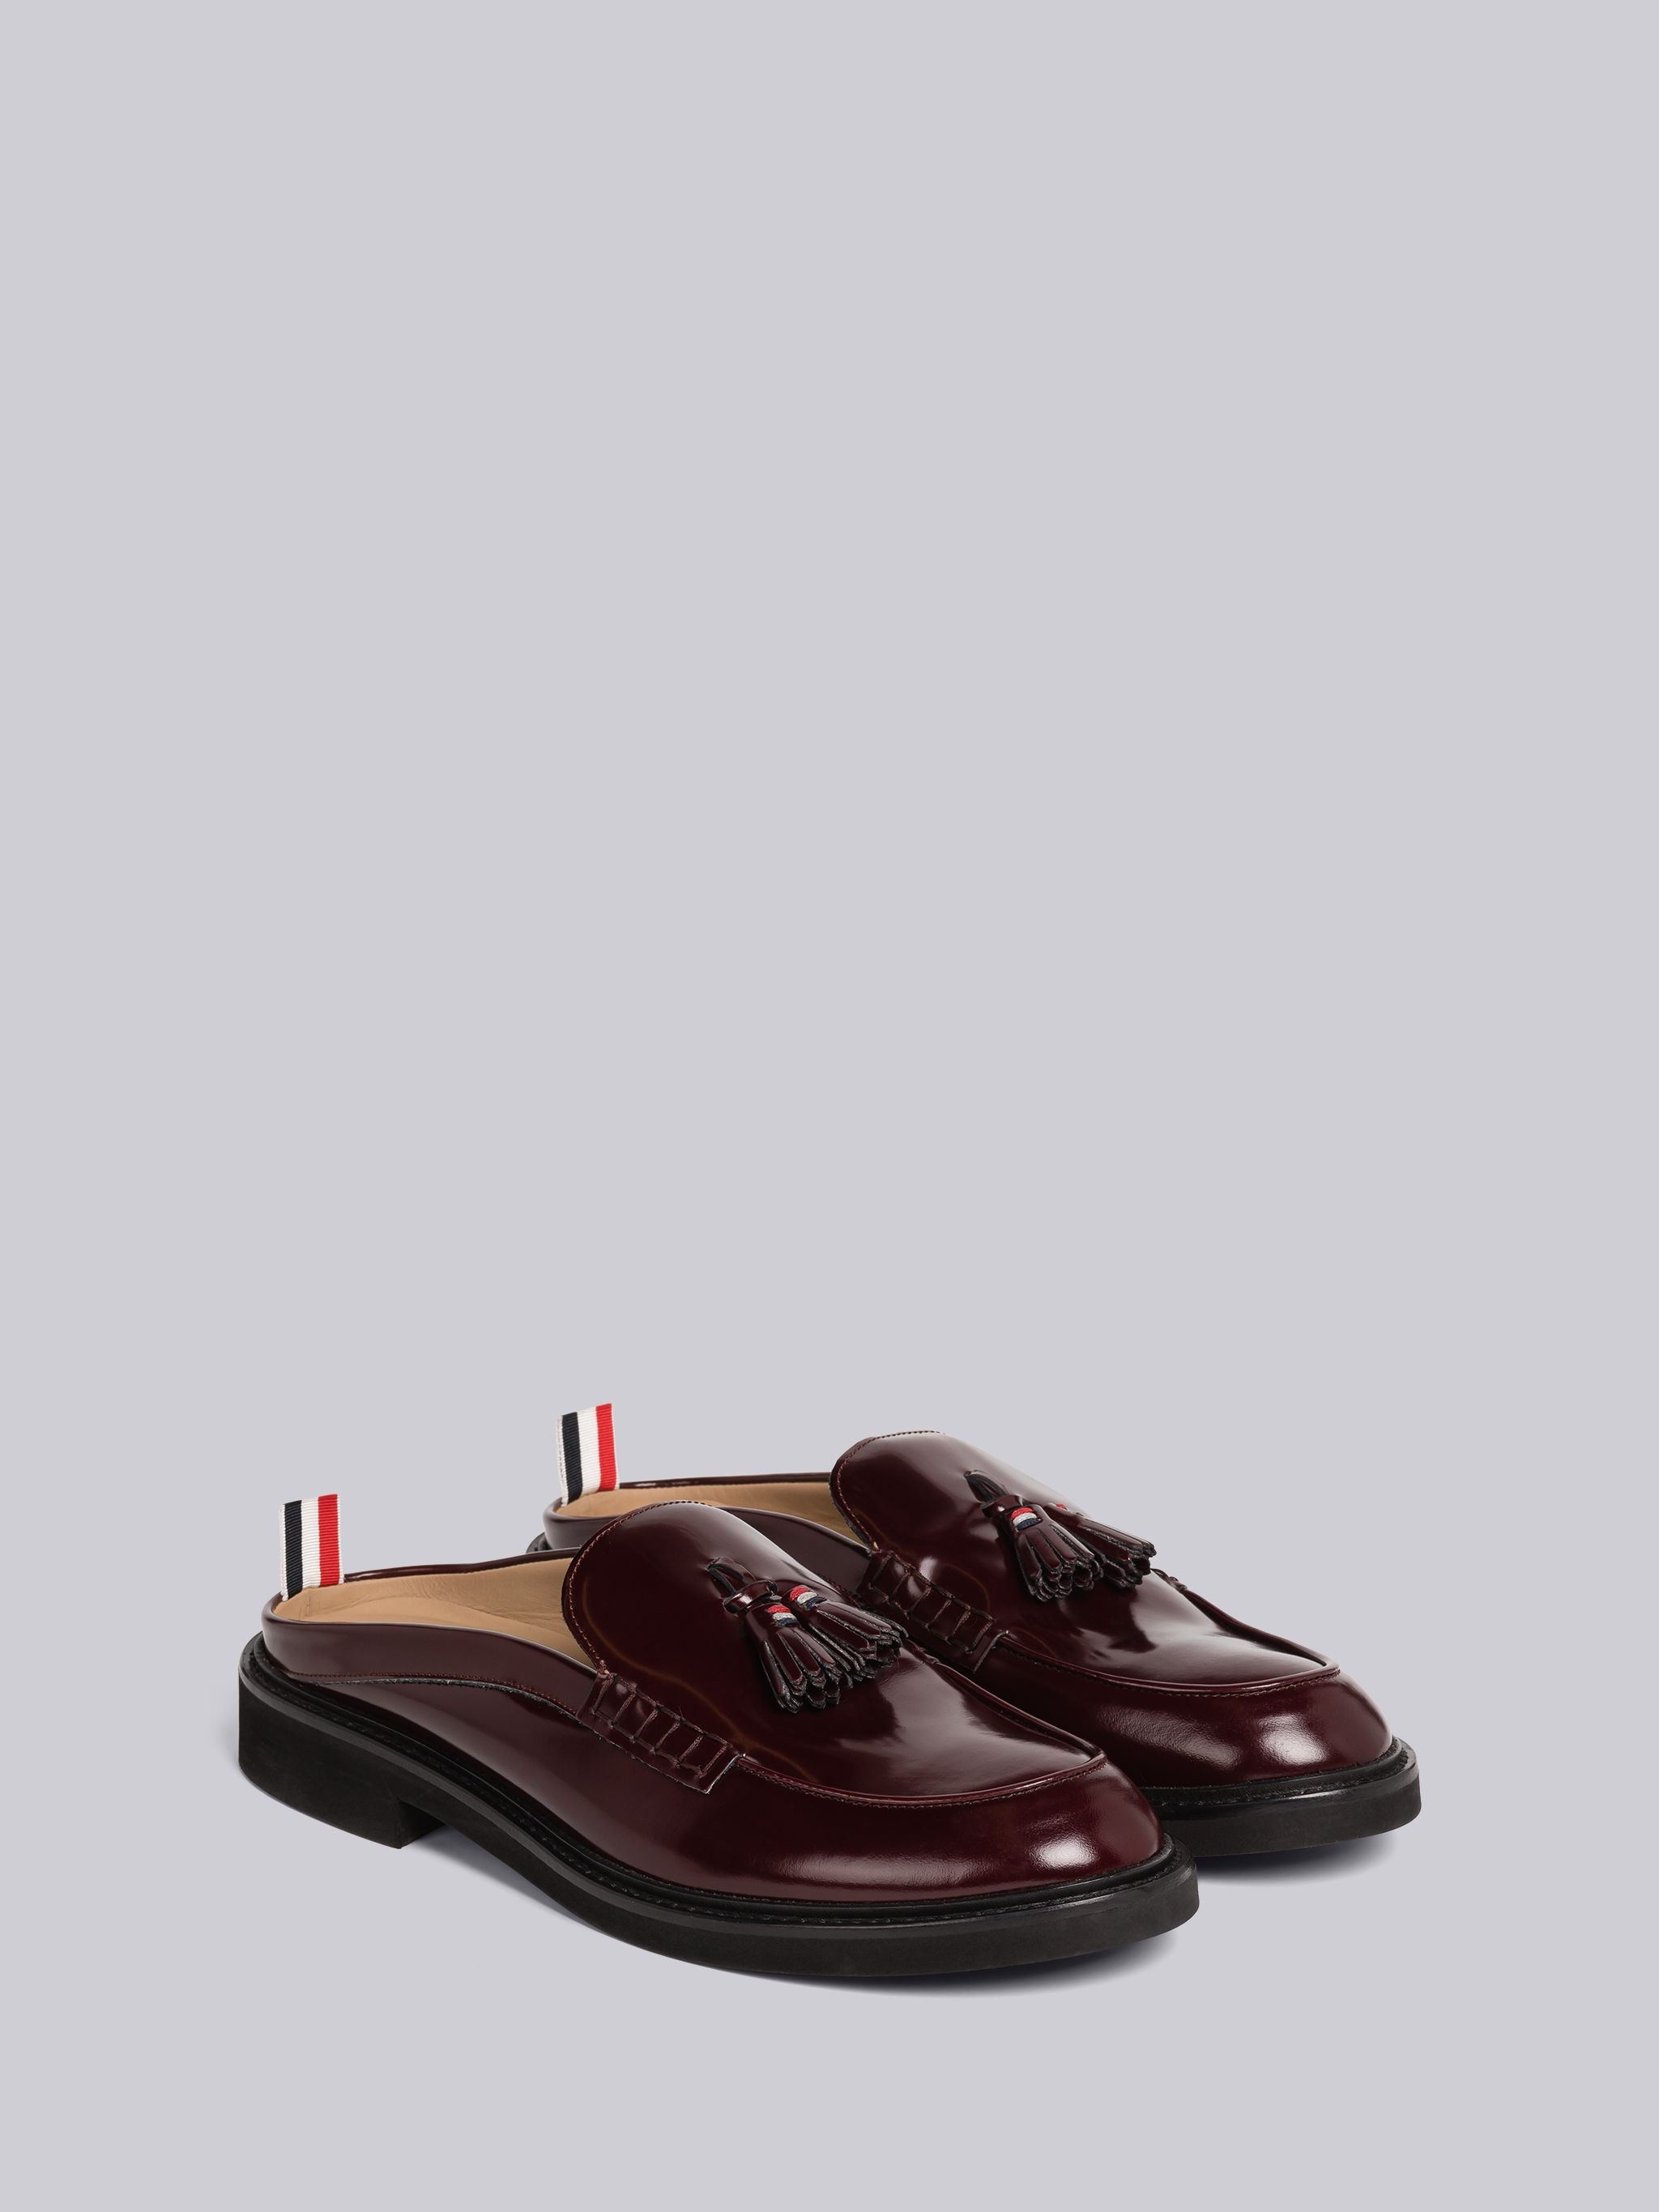 Soft Patent Leather Tassel Loafer Mule - 3